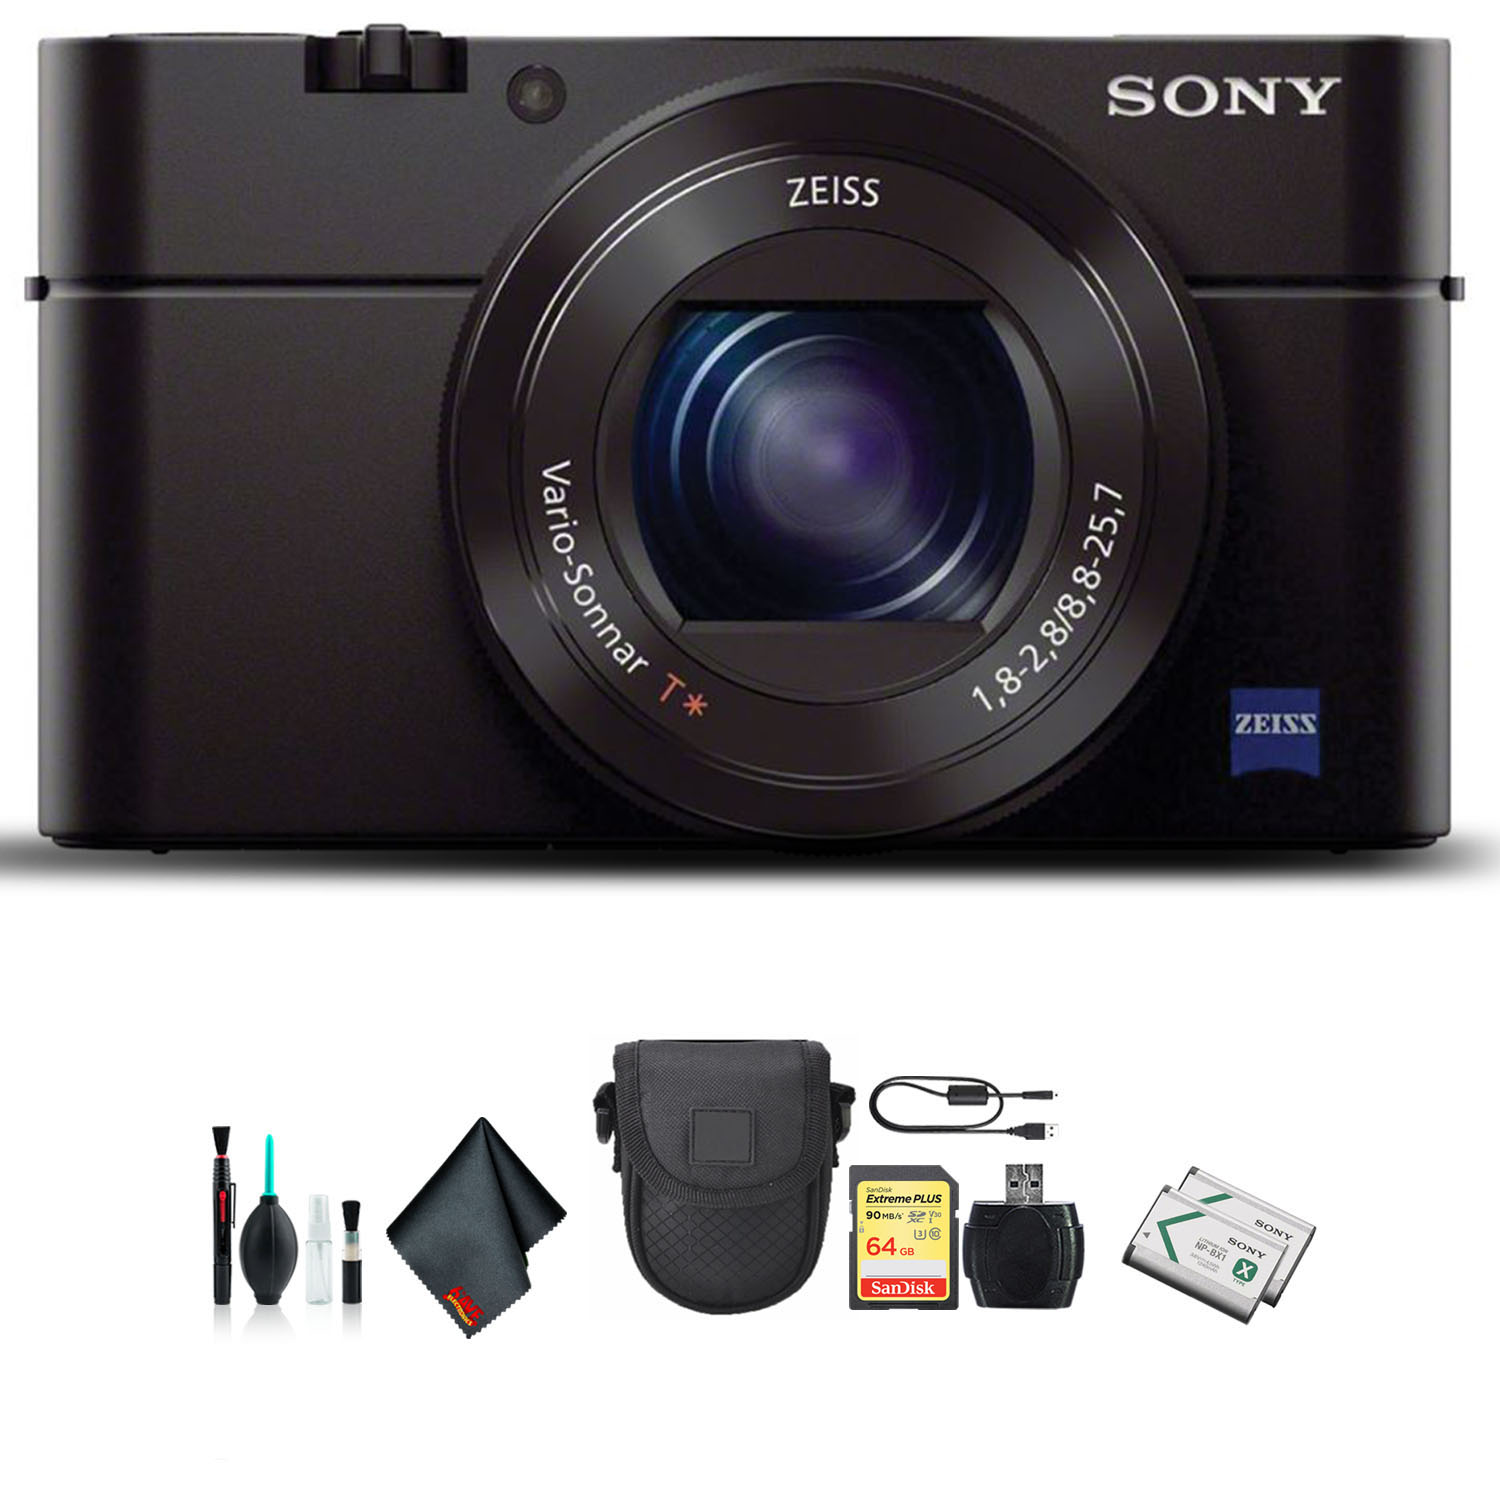 Sony Cyber-Shot DSC-RX100 III Camera DSCRX100M3/B with Soft Bag, Additional Battery, 64GB Memory Card, Card Reader, Plus - image 1 of 6